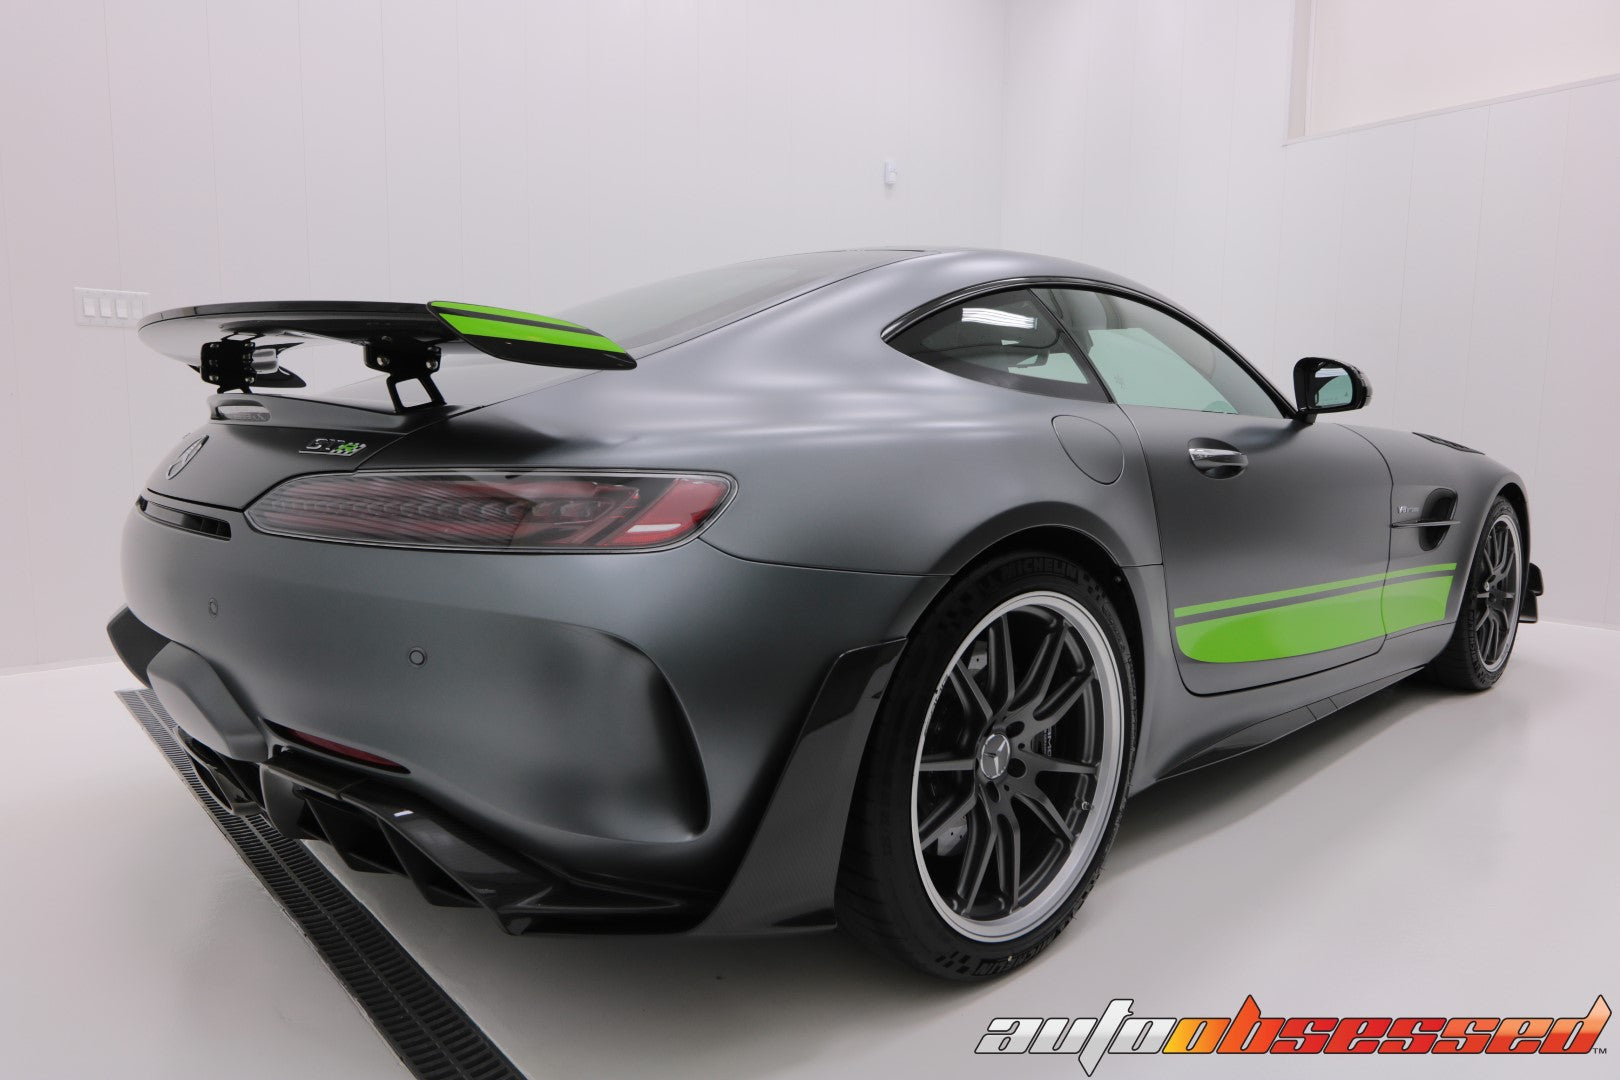 2020 Mercedes Benz AMG GTR Pro Car Detailing - Auto Obsessed